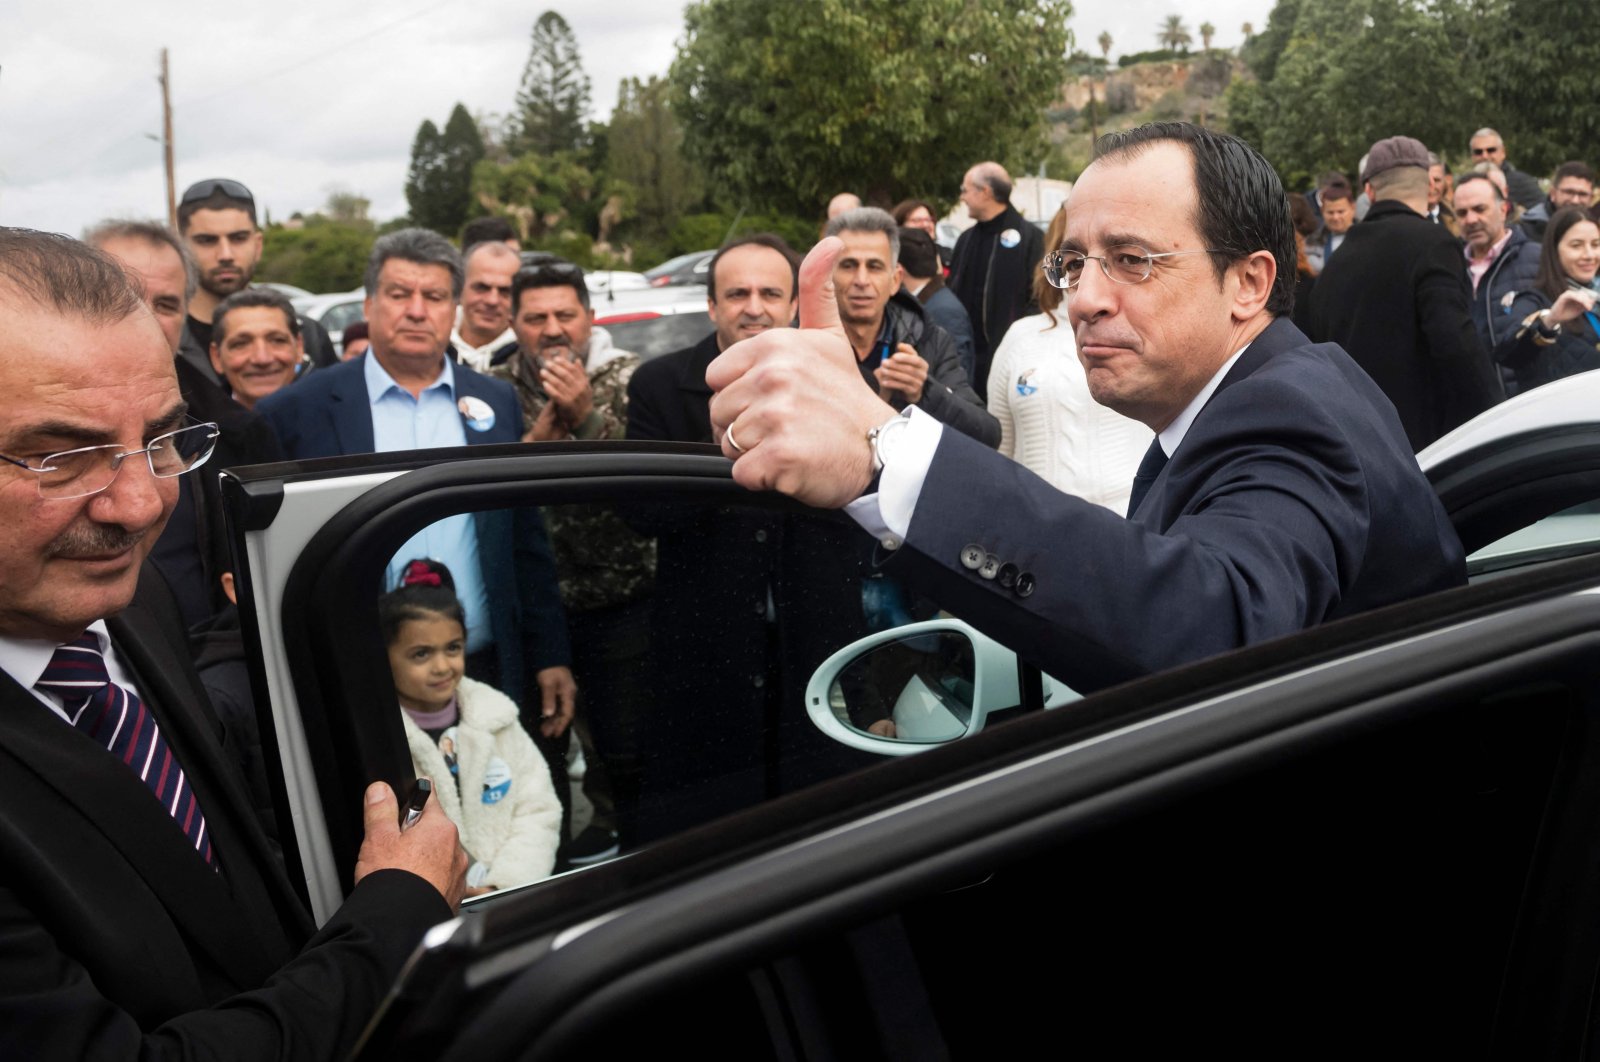 Former Greek Cypriot Foreign Minister and presidential candidate Nikos Christodoulides greets supporters at the Geroskypou polling center in the western Paphos district, Greek Cypriot administration, Feb. 5, 2023. (AFP Photo)